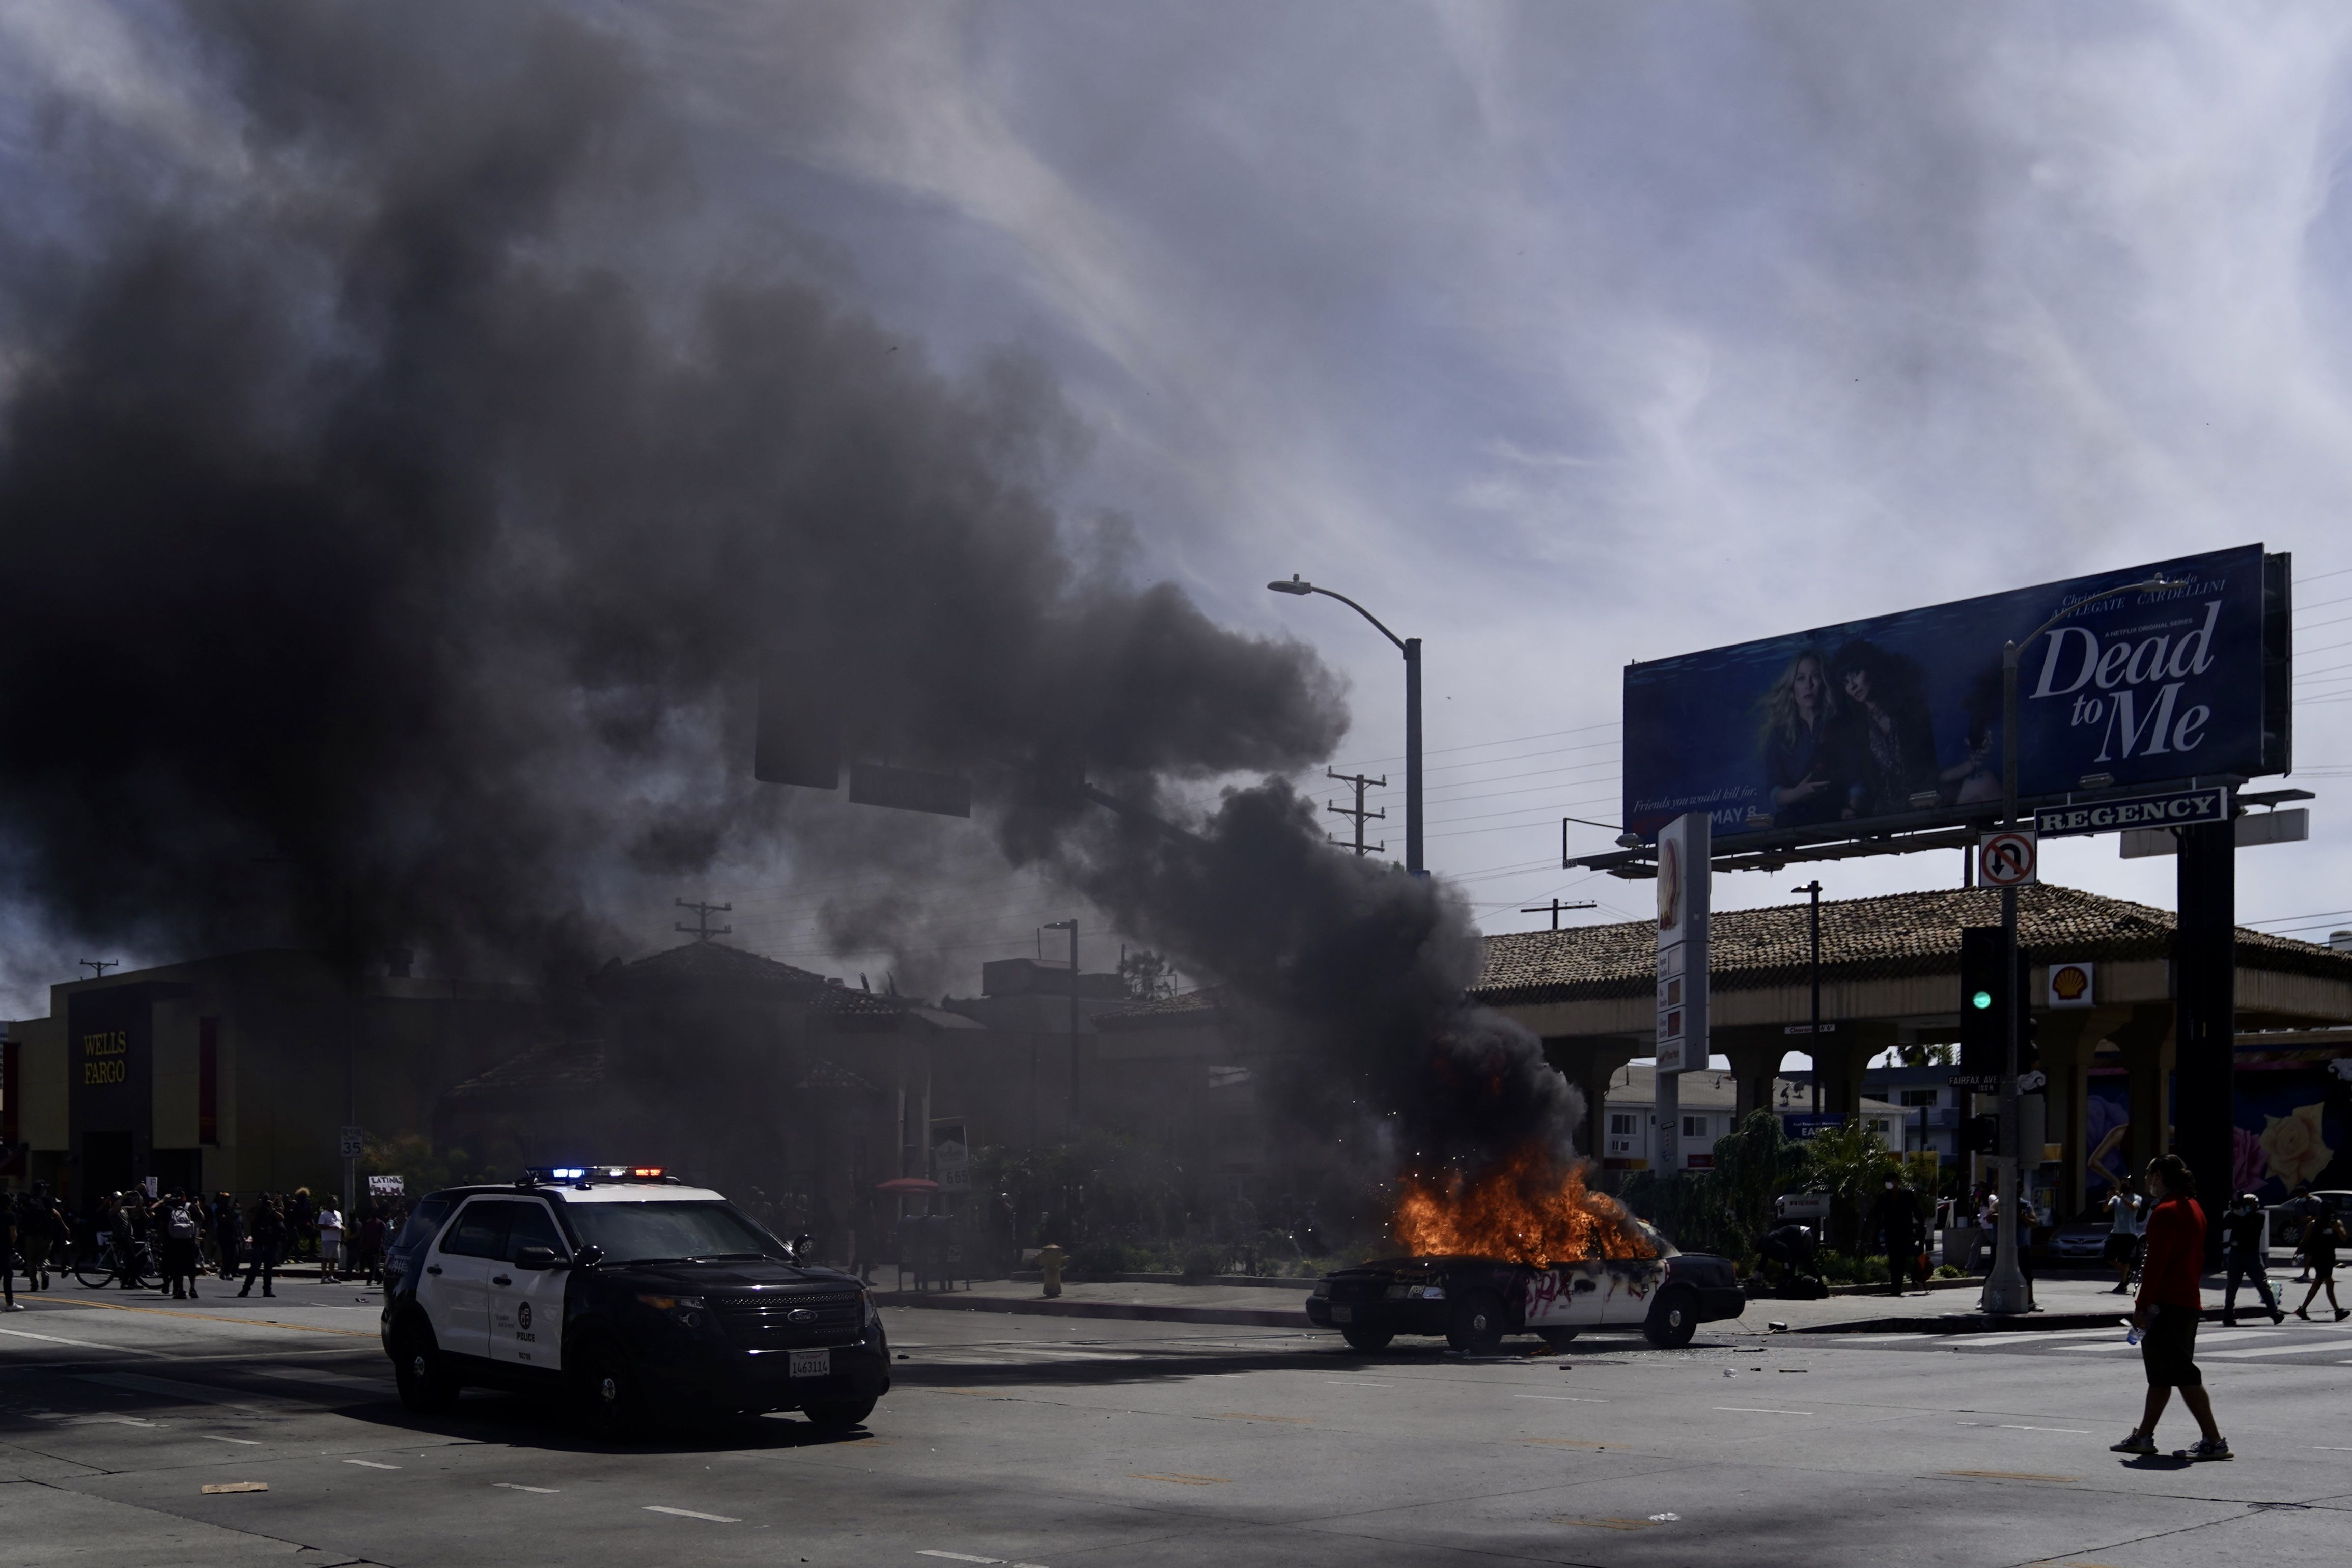 Groups of protesters gather in Los Angeles as police cars burn in a fire